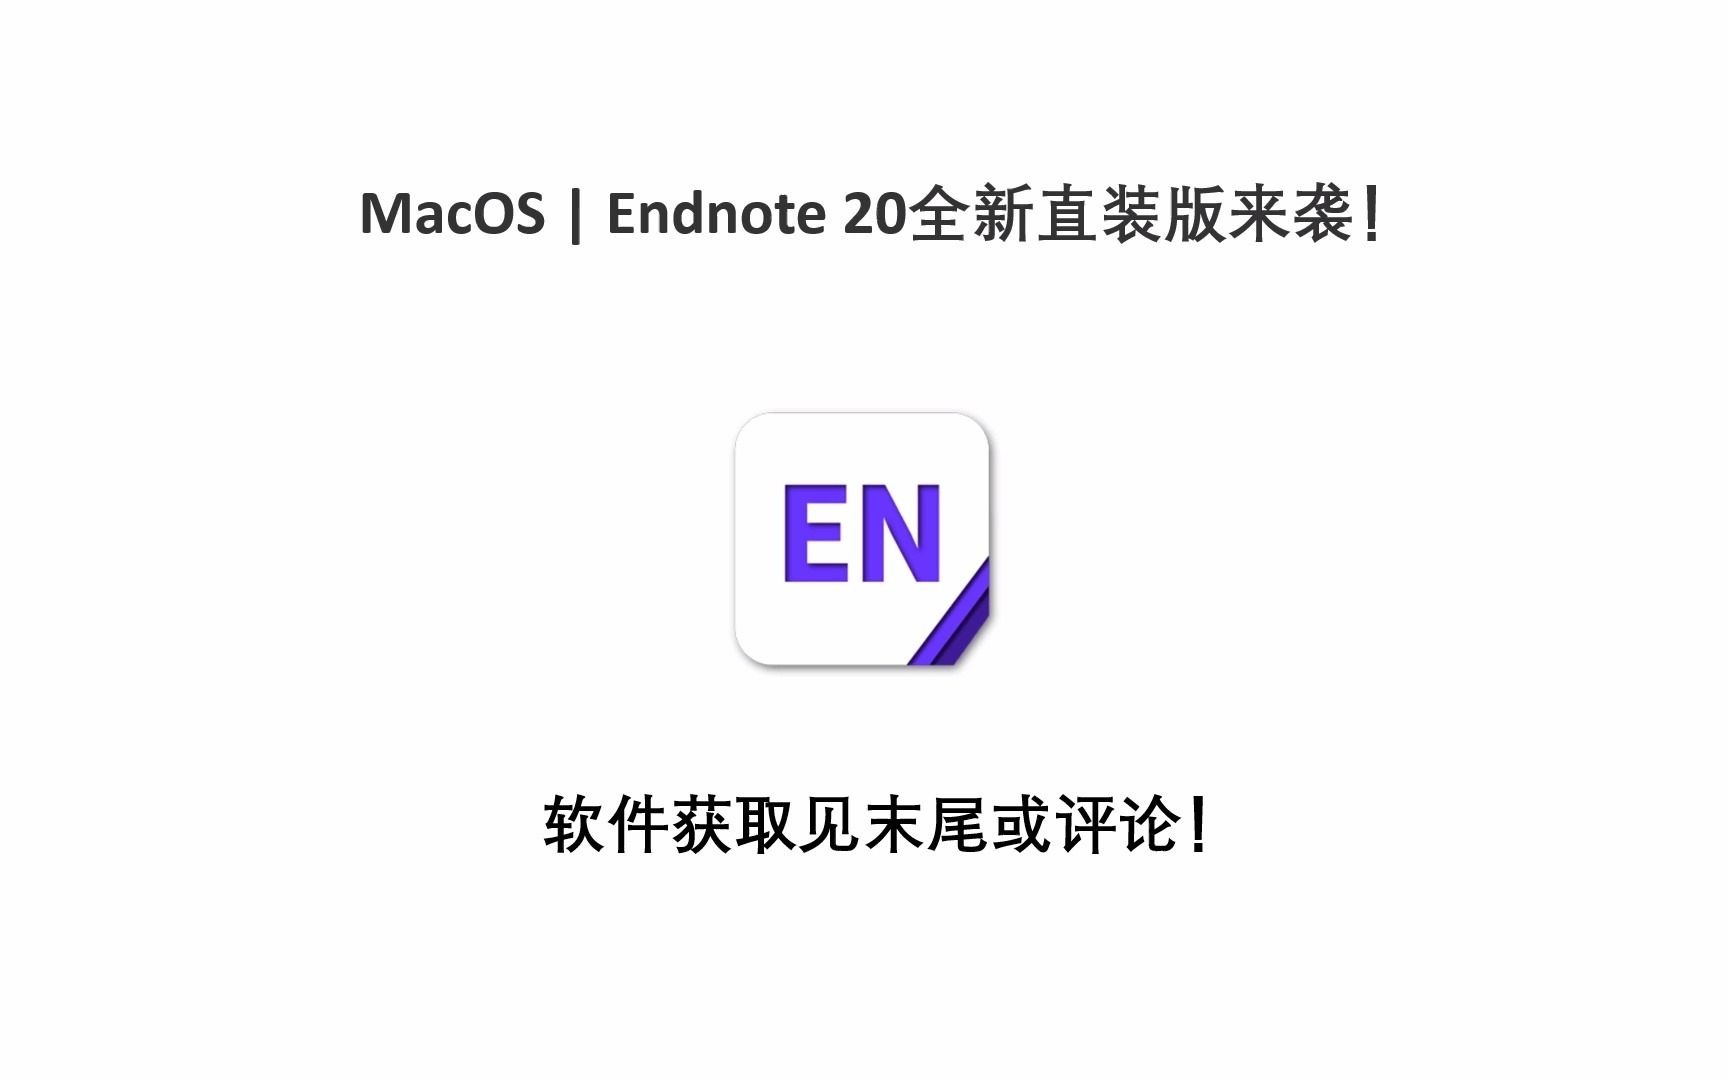 endnote 20 macos